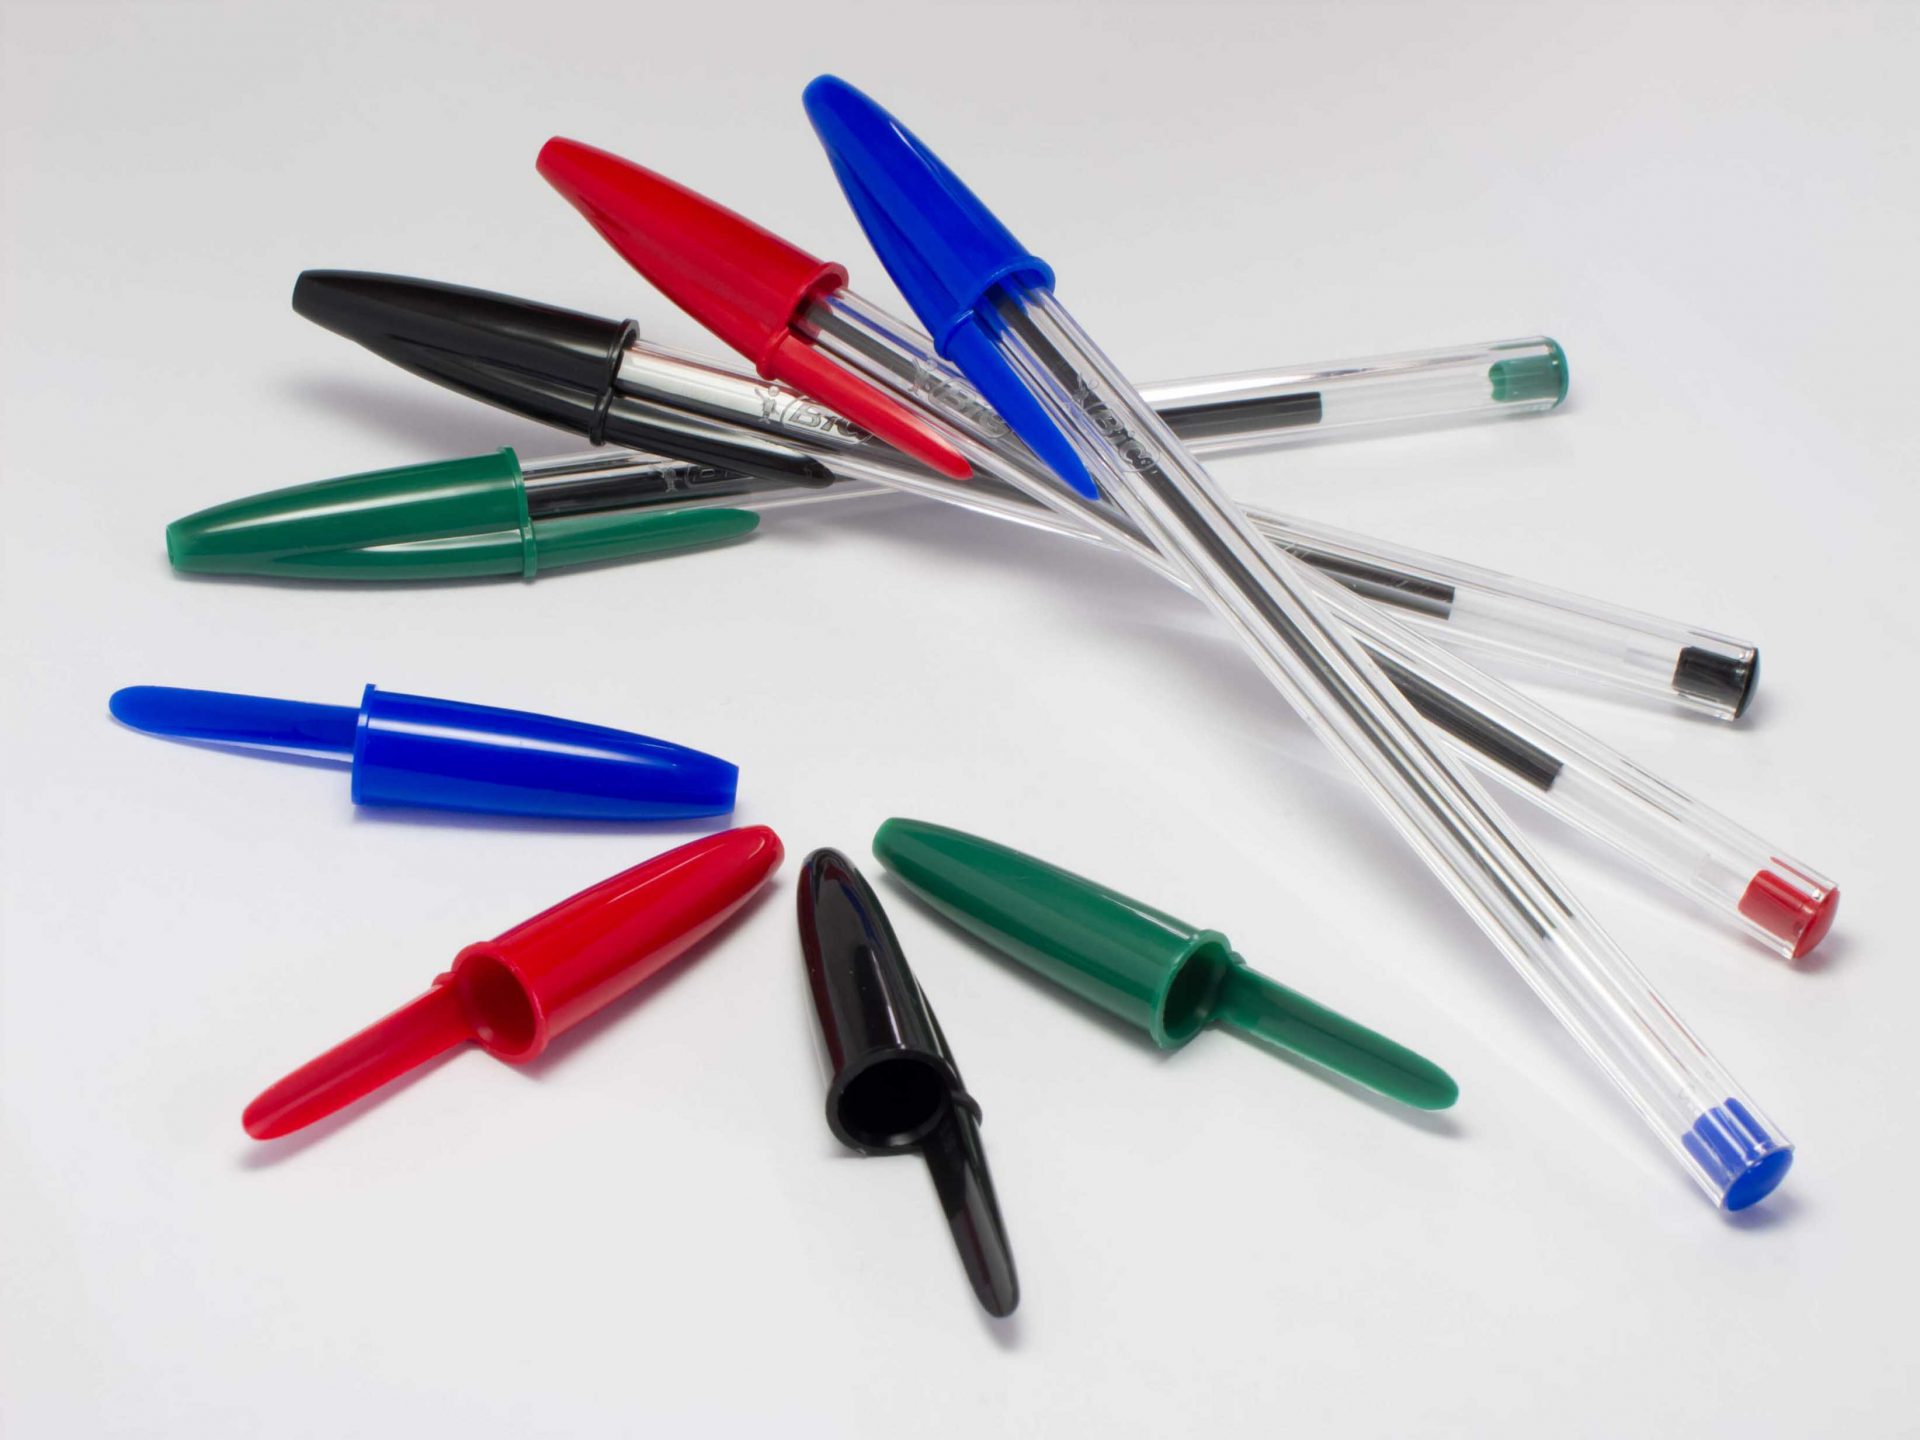 The Bic pen was invented by László Bíró in 1938 as a replacement to the messy mishaps of fountain pens - ©Trounce